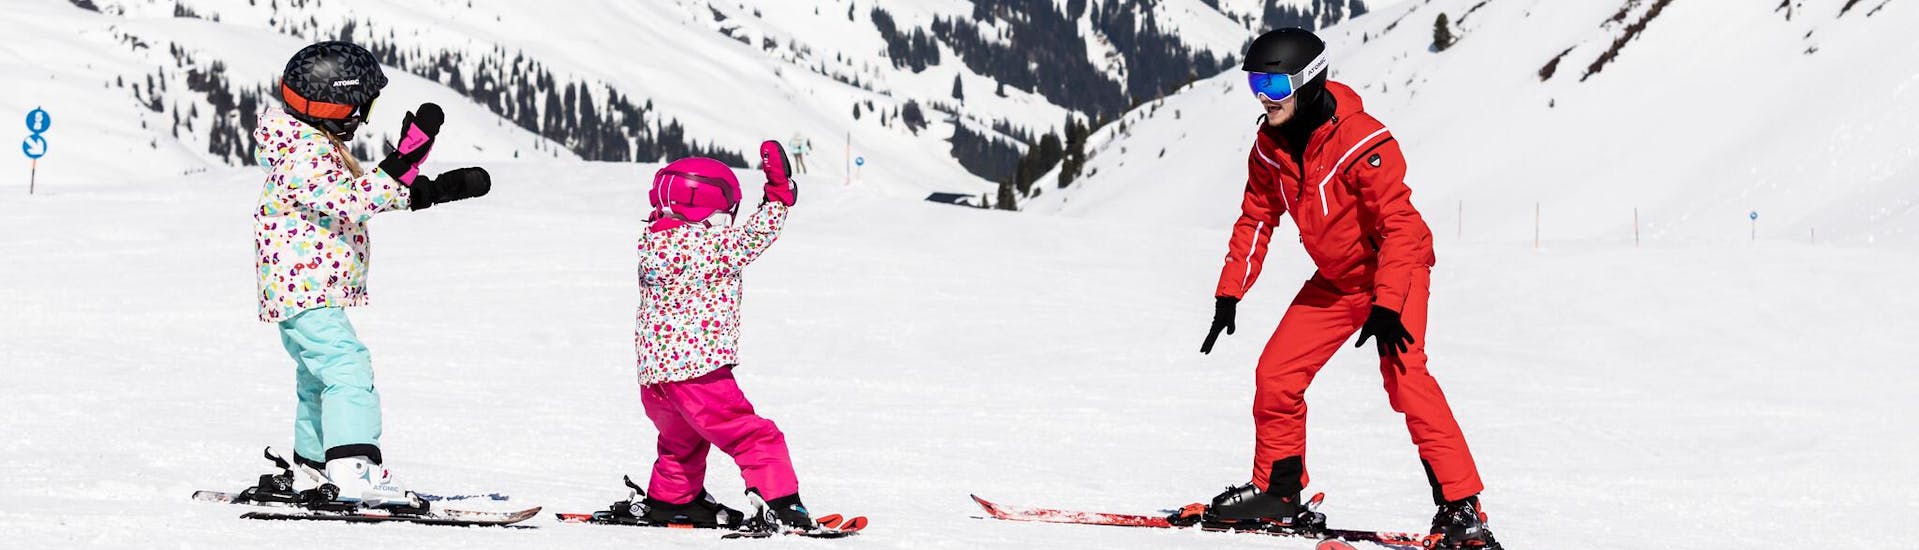 Two kids skiing for the first time during a ski lesson for beginners